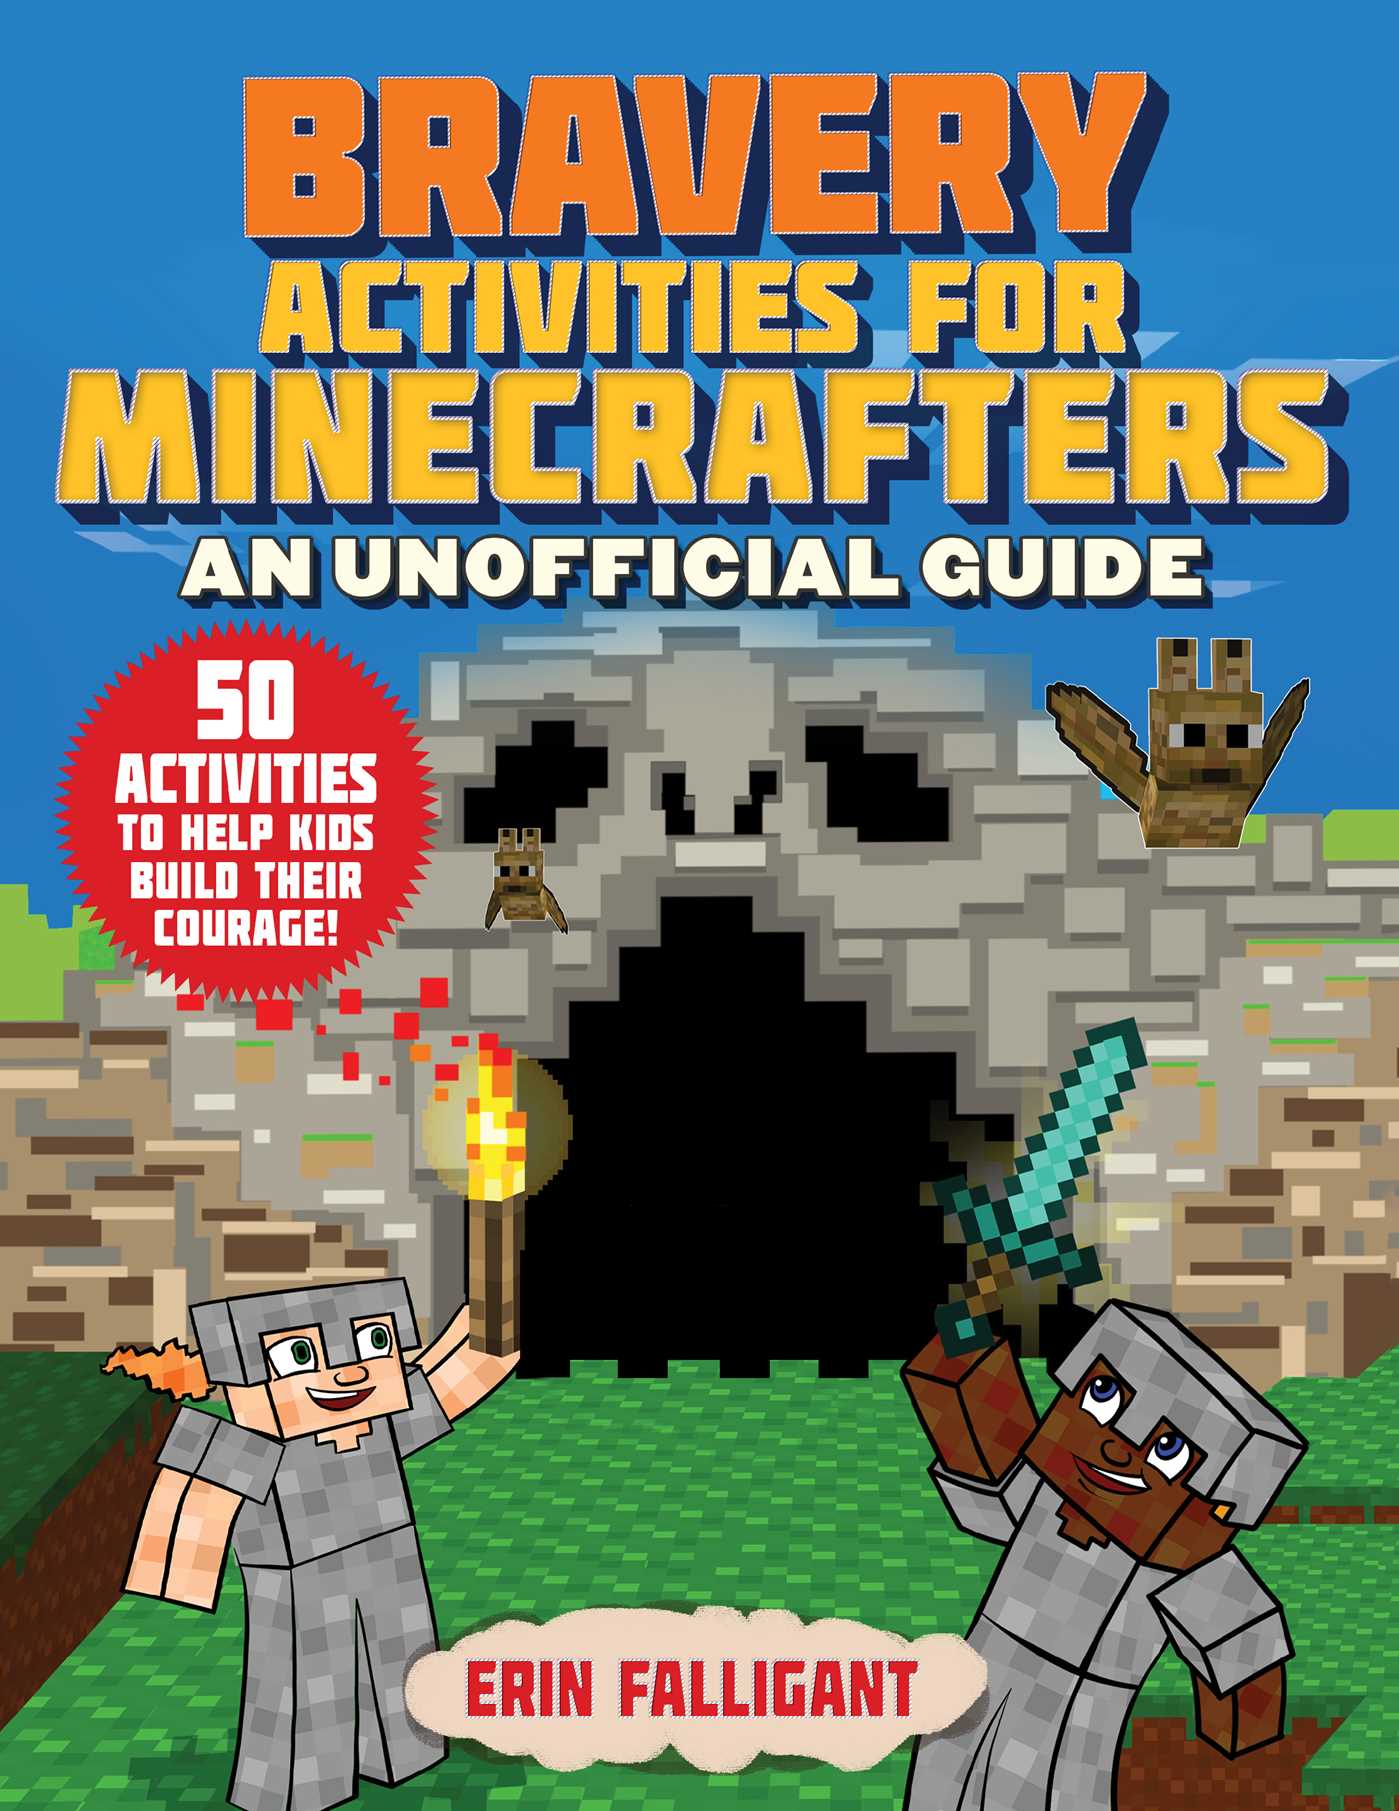 Bravery Activities for Minecrafters : 50 Activities to Help Kids Build Their Courage!